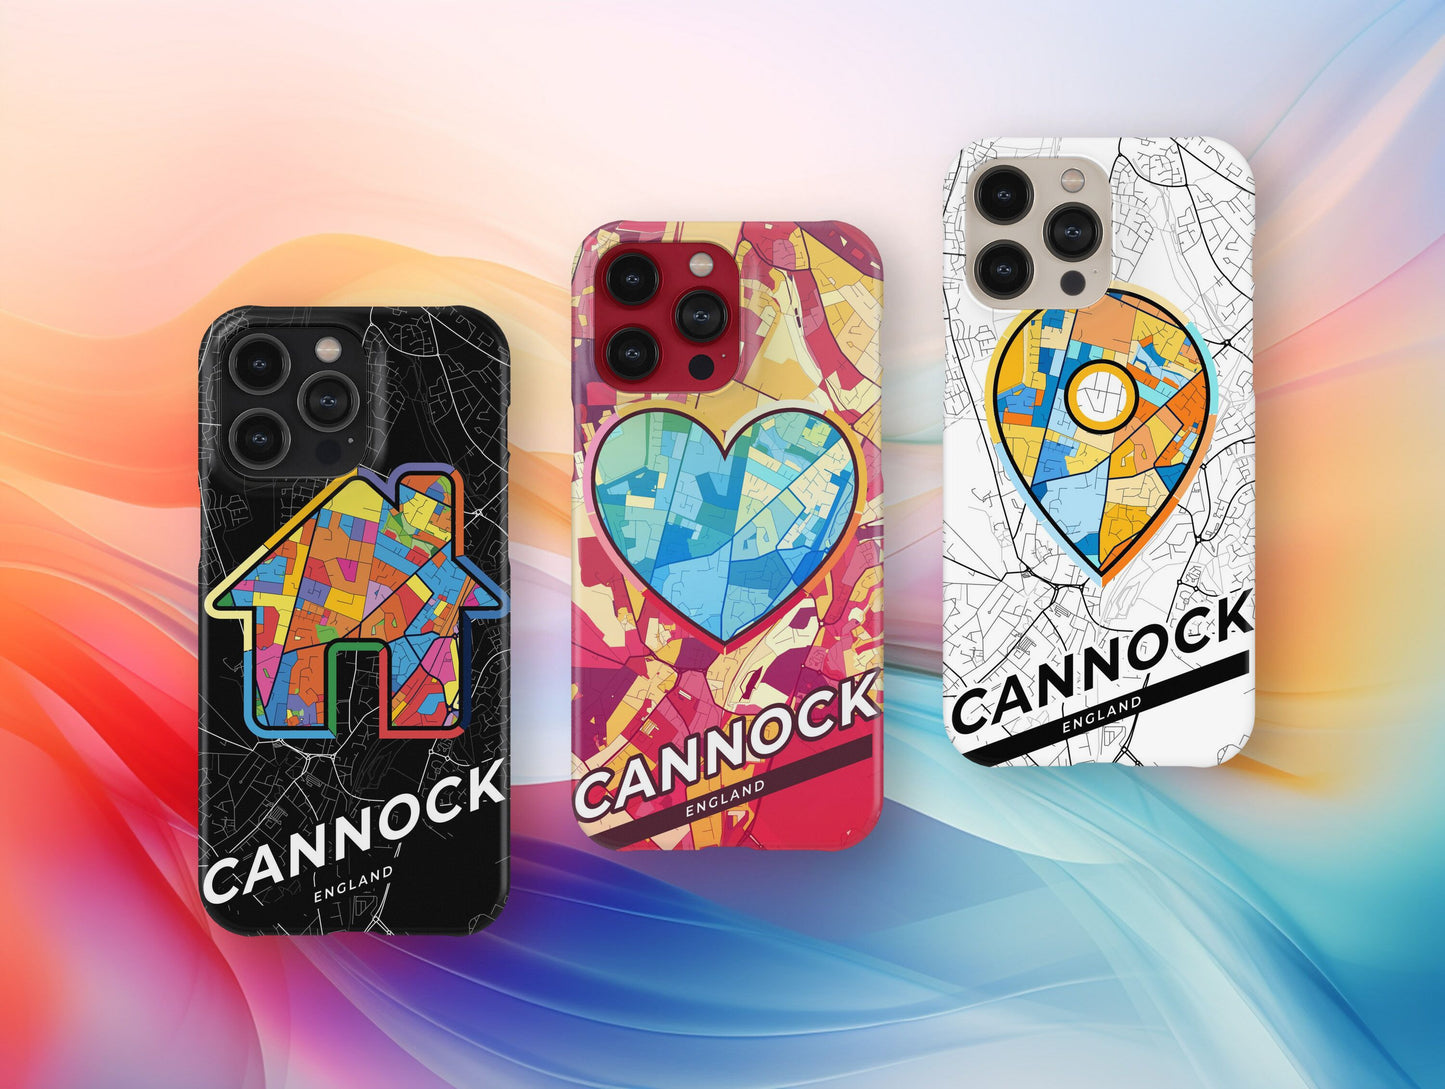 Cannock England slim phone case with colorful icon. Birthday, wedding or housewarming gift. Couple match cases.